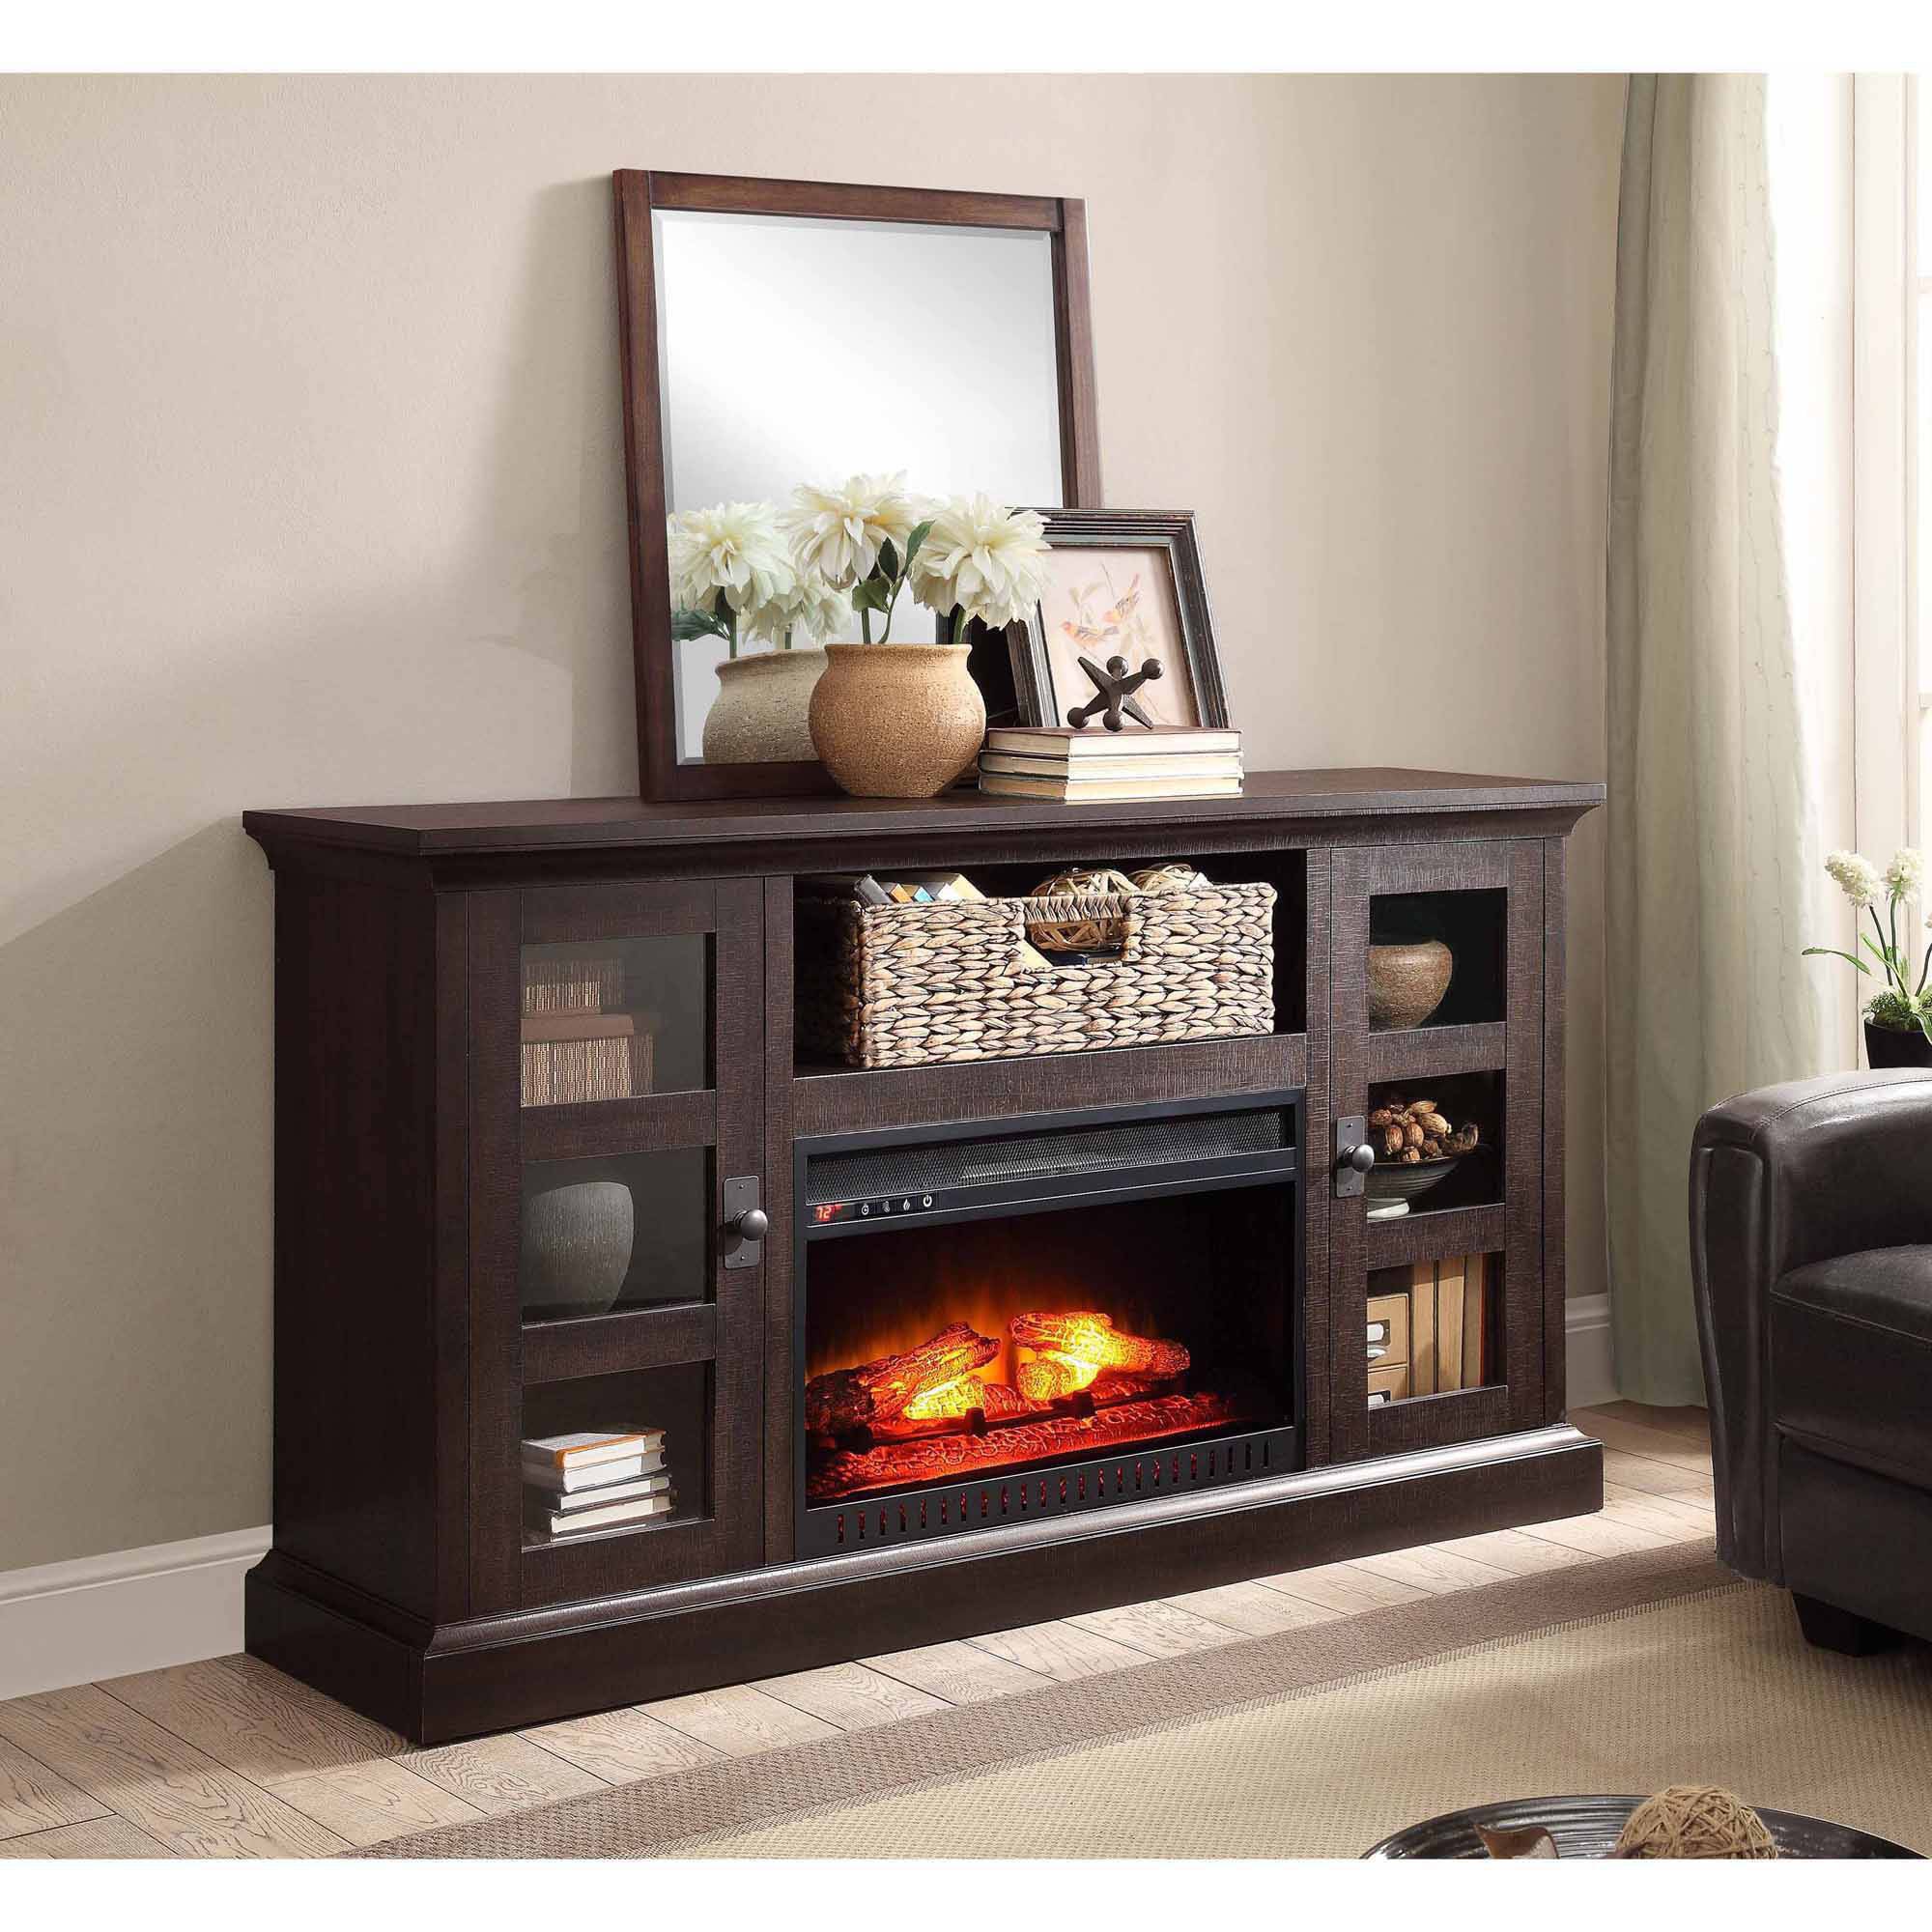 Fireplace Media Console Lovely Media Console Fireplace Charming Fireplace